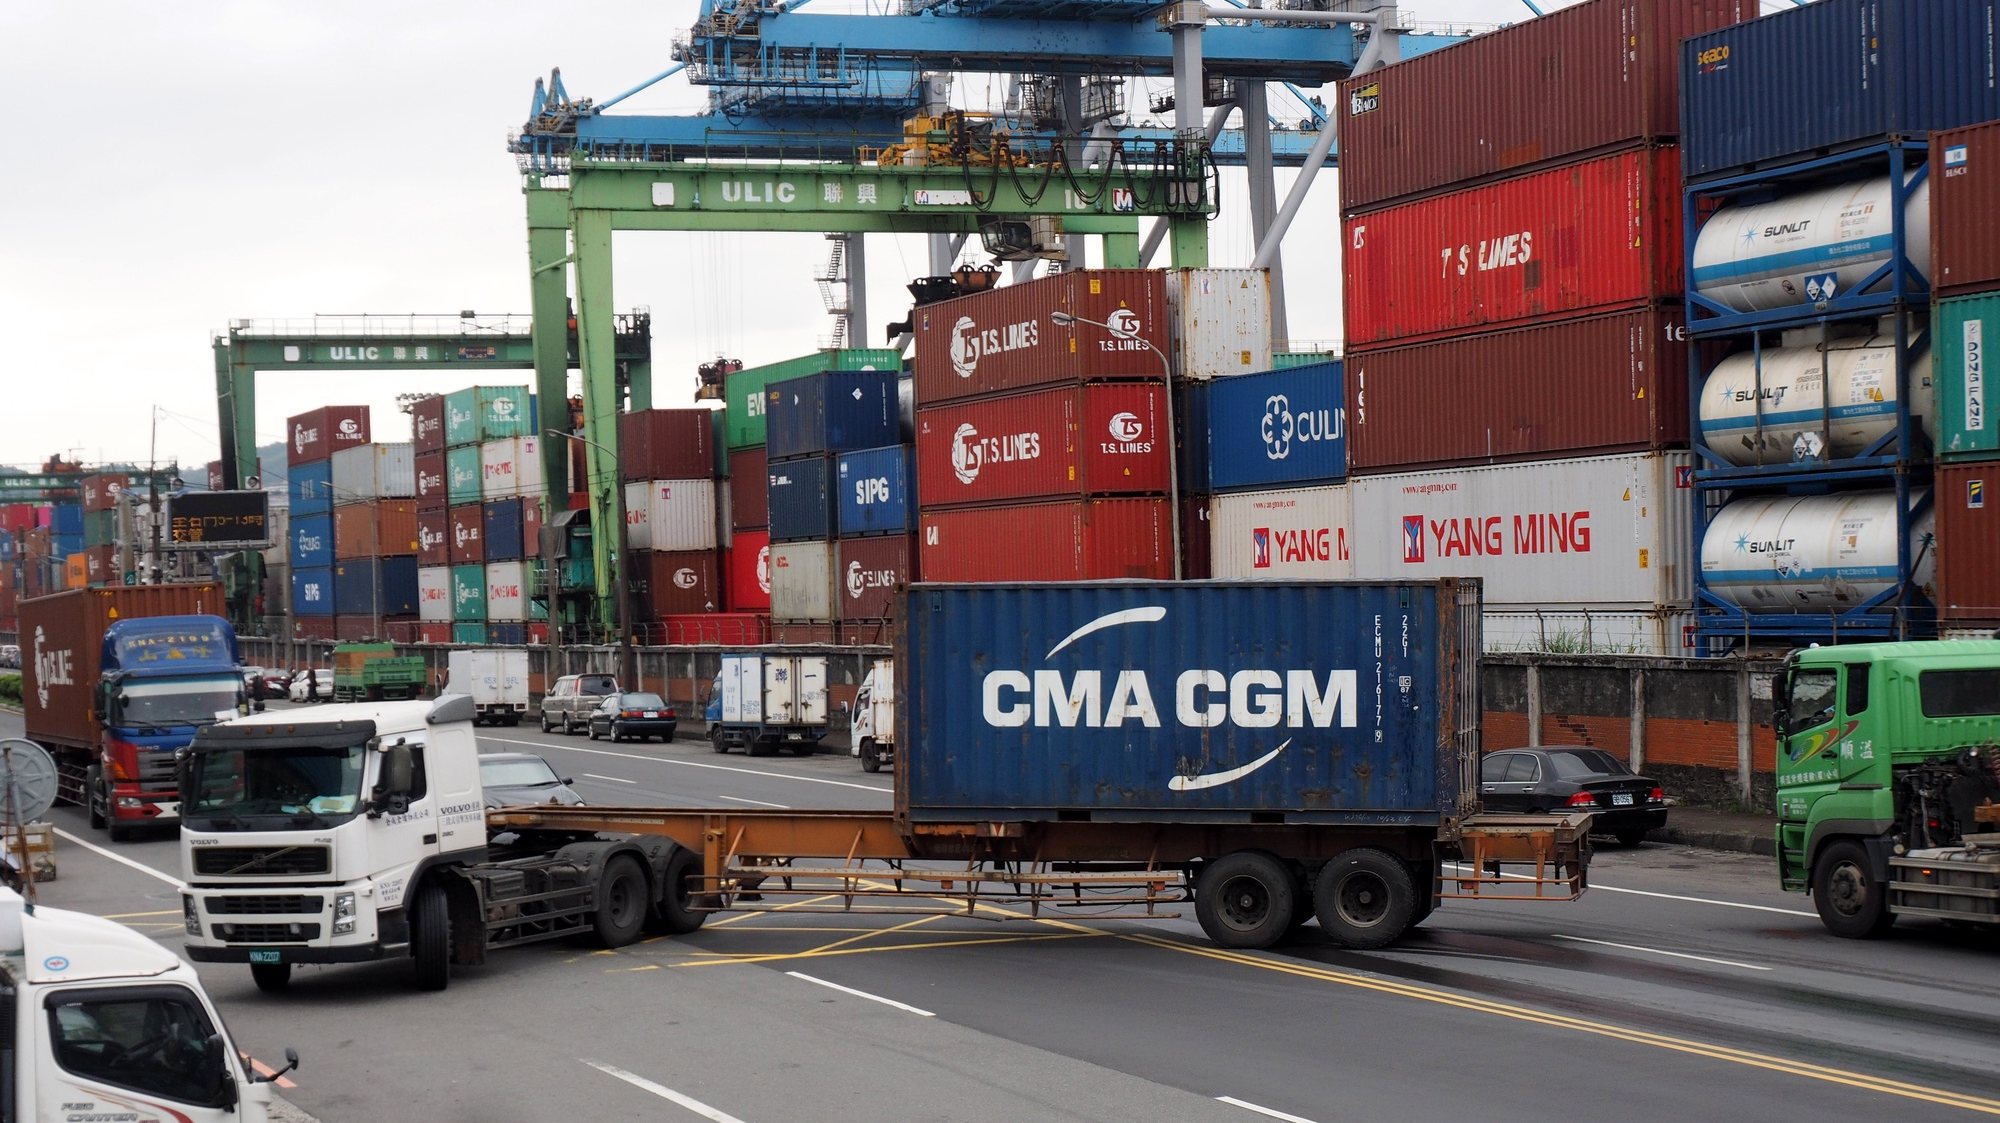 epa07976381 A truck unloads containers at Keelung Harbor in Keelung City, Taiwan, 06 November 2019. According to a United Nations (UN) Conference on Trade and Development (UNCTAD) study released on 05 November 2019, Taiwan has been the largest beneficiary of the ongoing trade war between China and the United States. The trade war managed to hurt the economy of both countries, but also helped others by diverting production to their markets. In the first half of 2019, China&#039;s export to the USA fell by nearly 35 billion US dollar, while Taiwan&#039;s export to the USA rose by 4.2 billion US dollar year on year.  EPA/DAVID CHANG